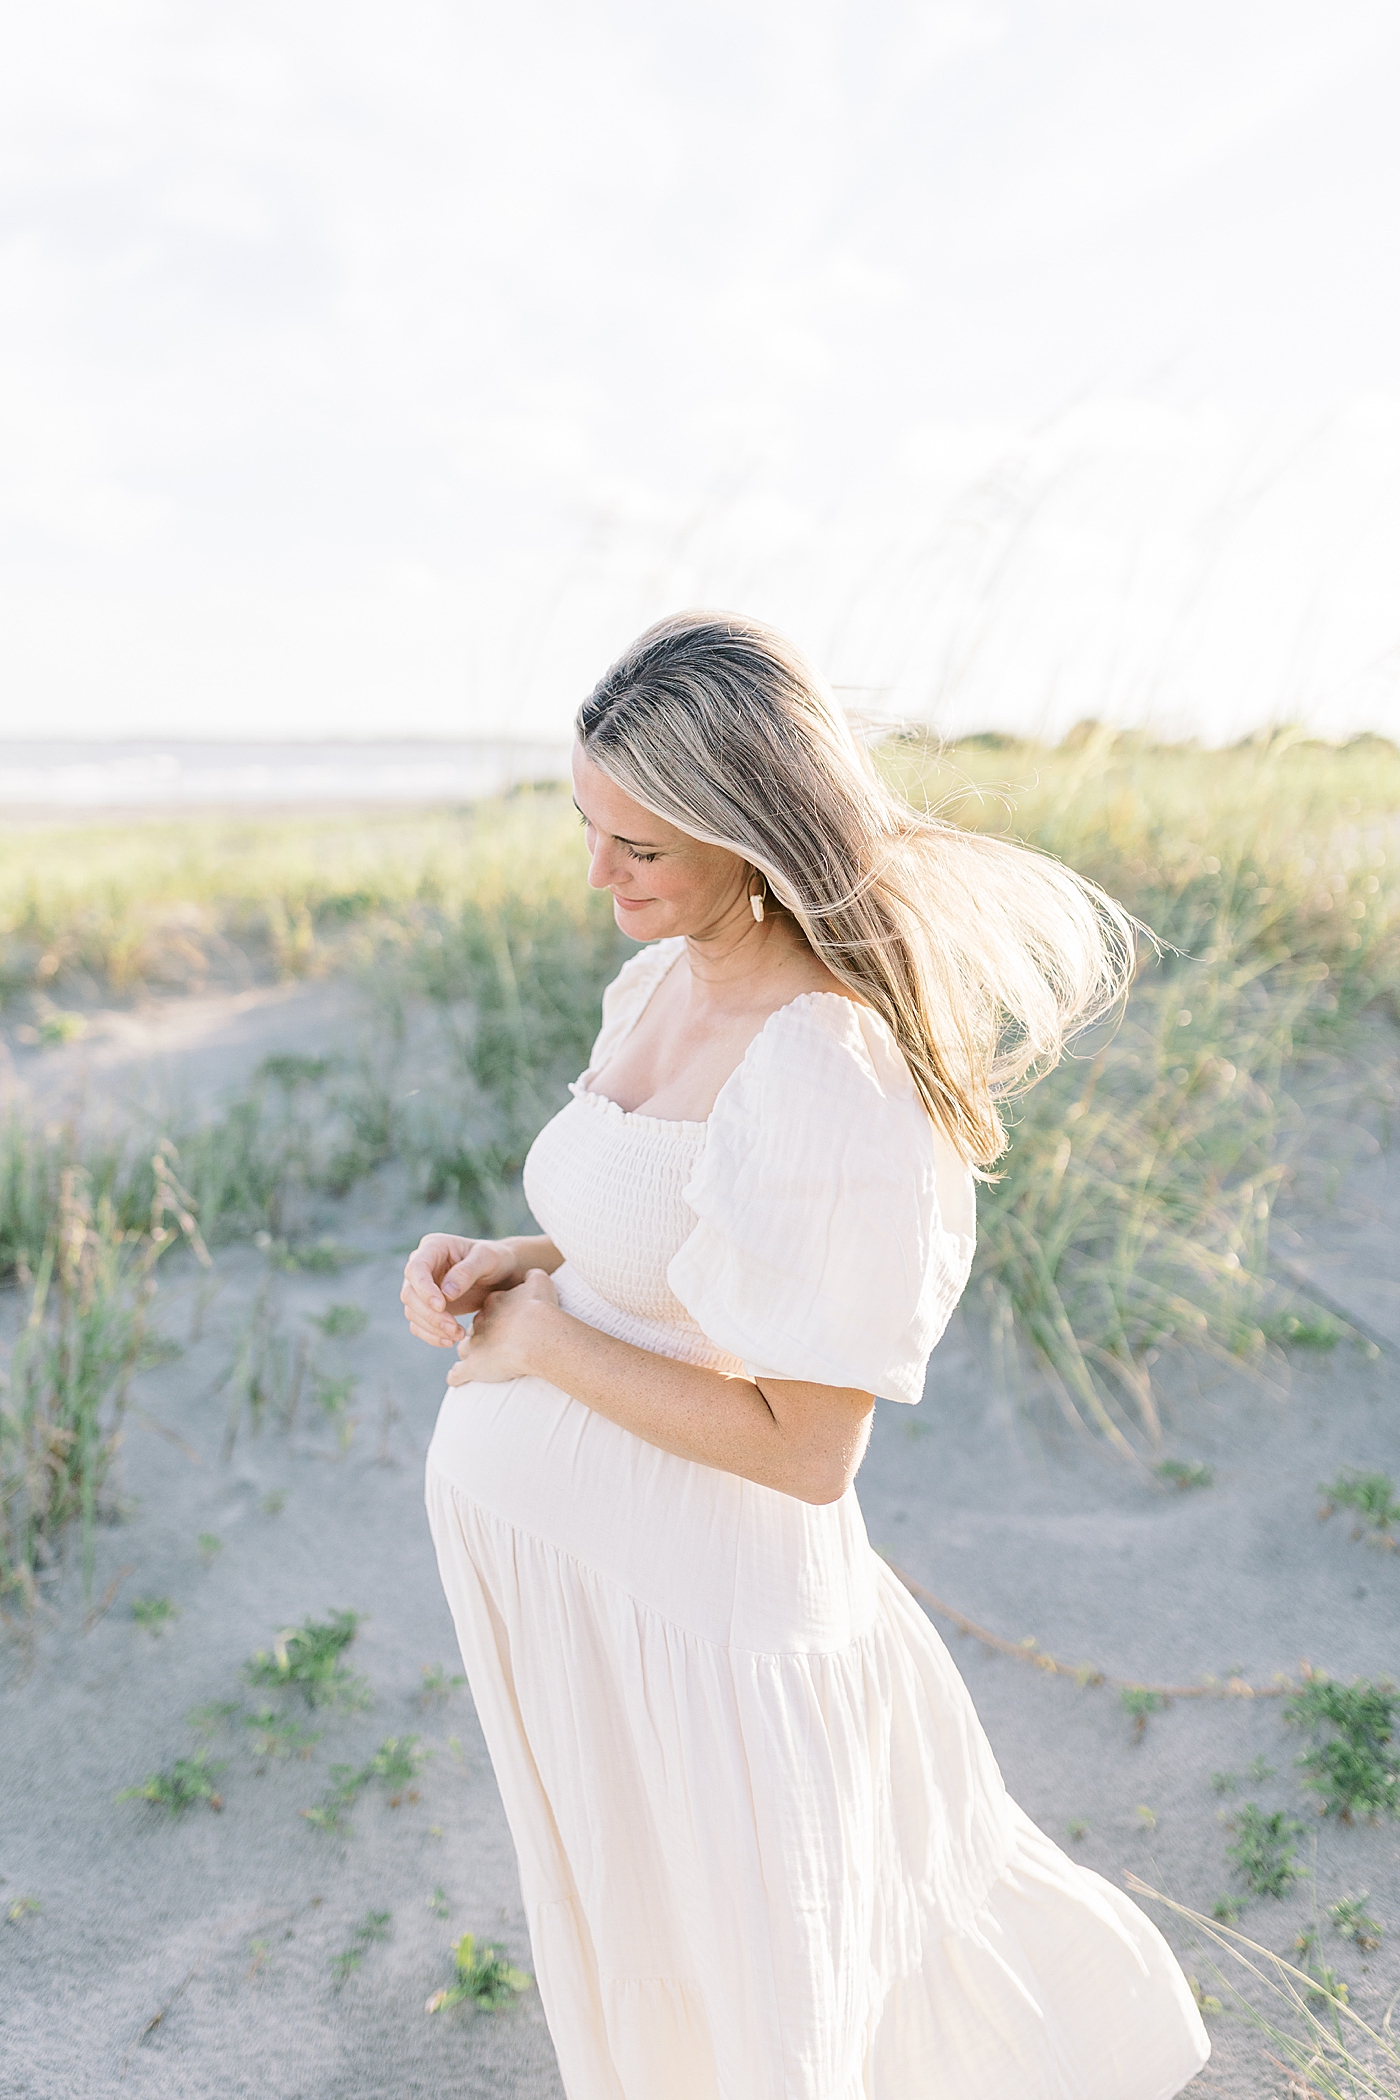 Mom to be with blonde hair in a white dress holding her belly | Image by Caitlyn Motycka